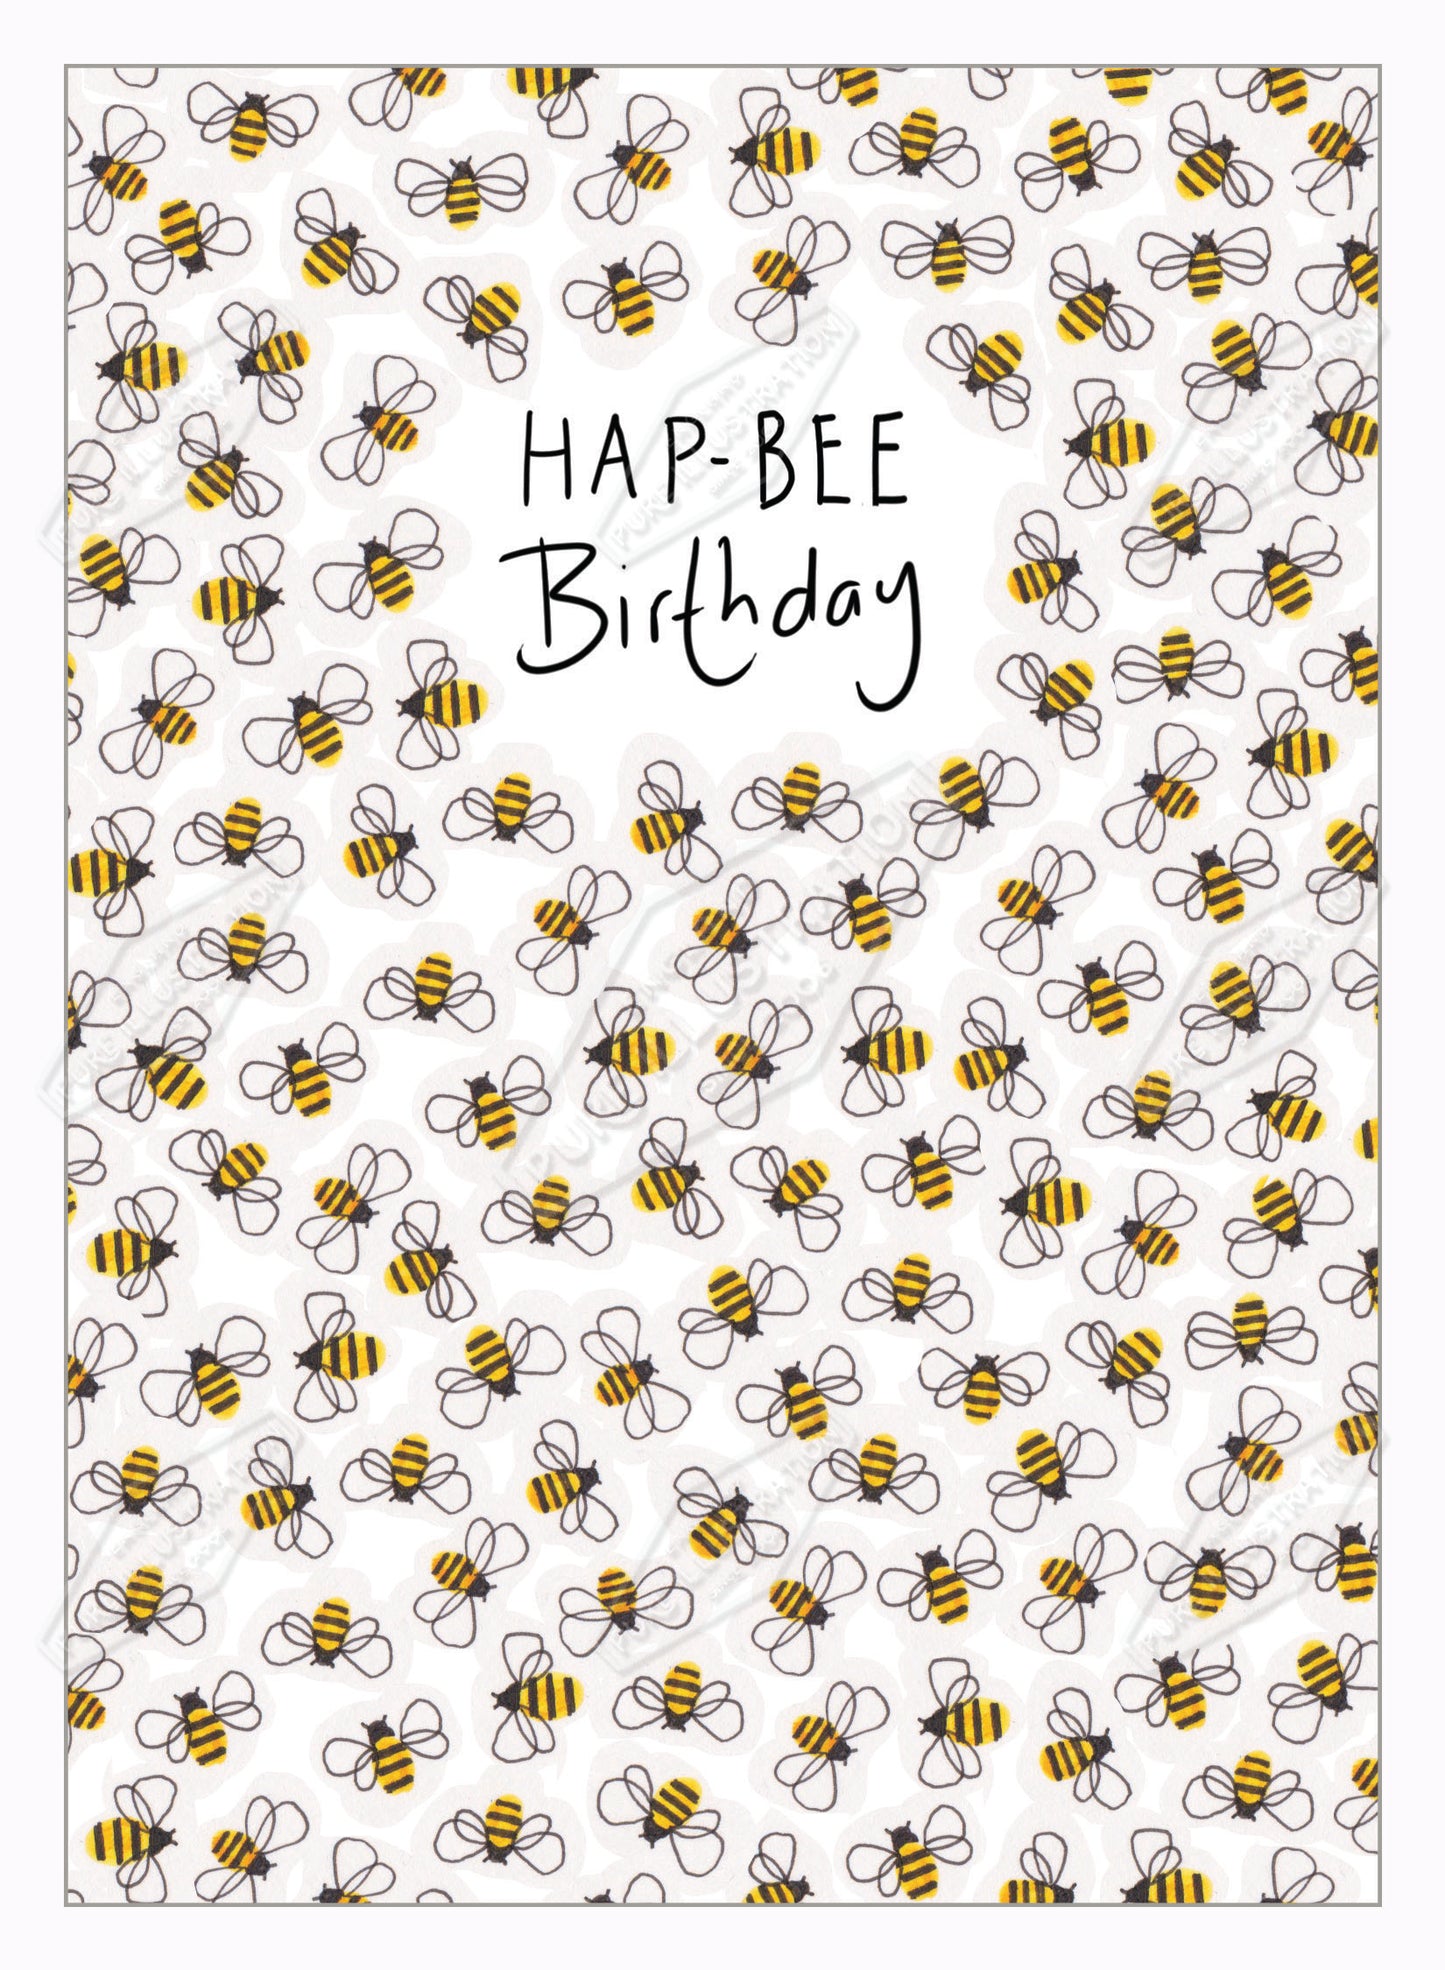 00035857AMA - Ally Marie is represented by Pure Art Licensing Agency - Birthday Greeting Card Design